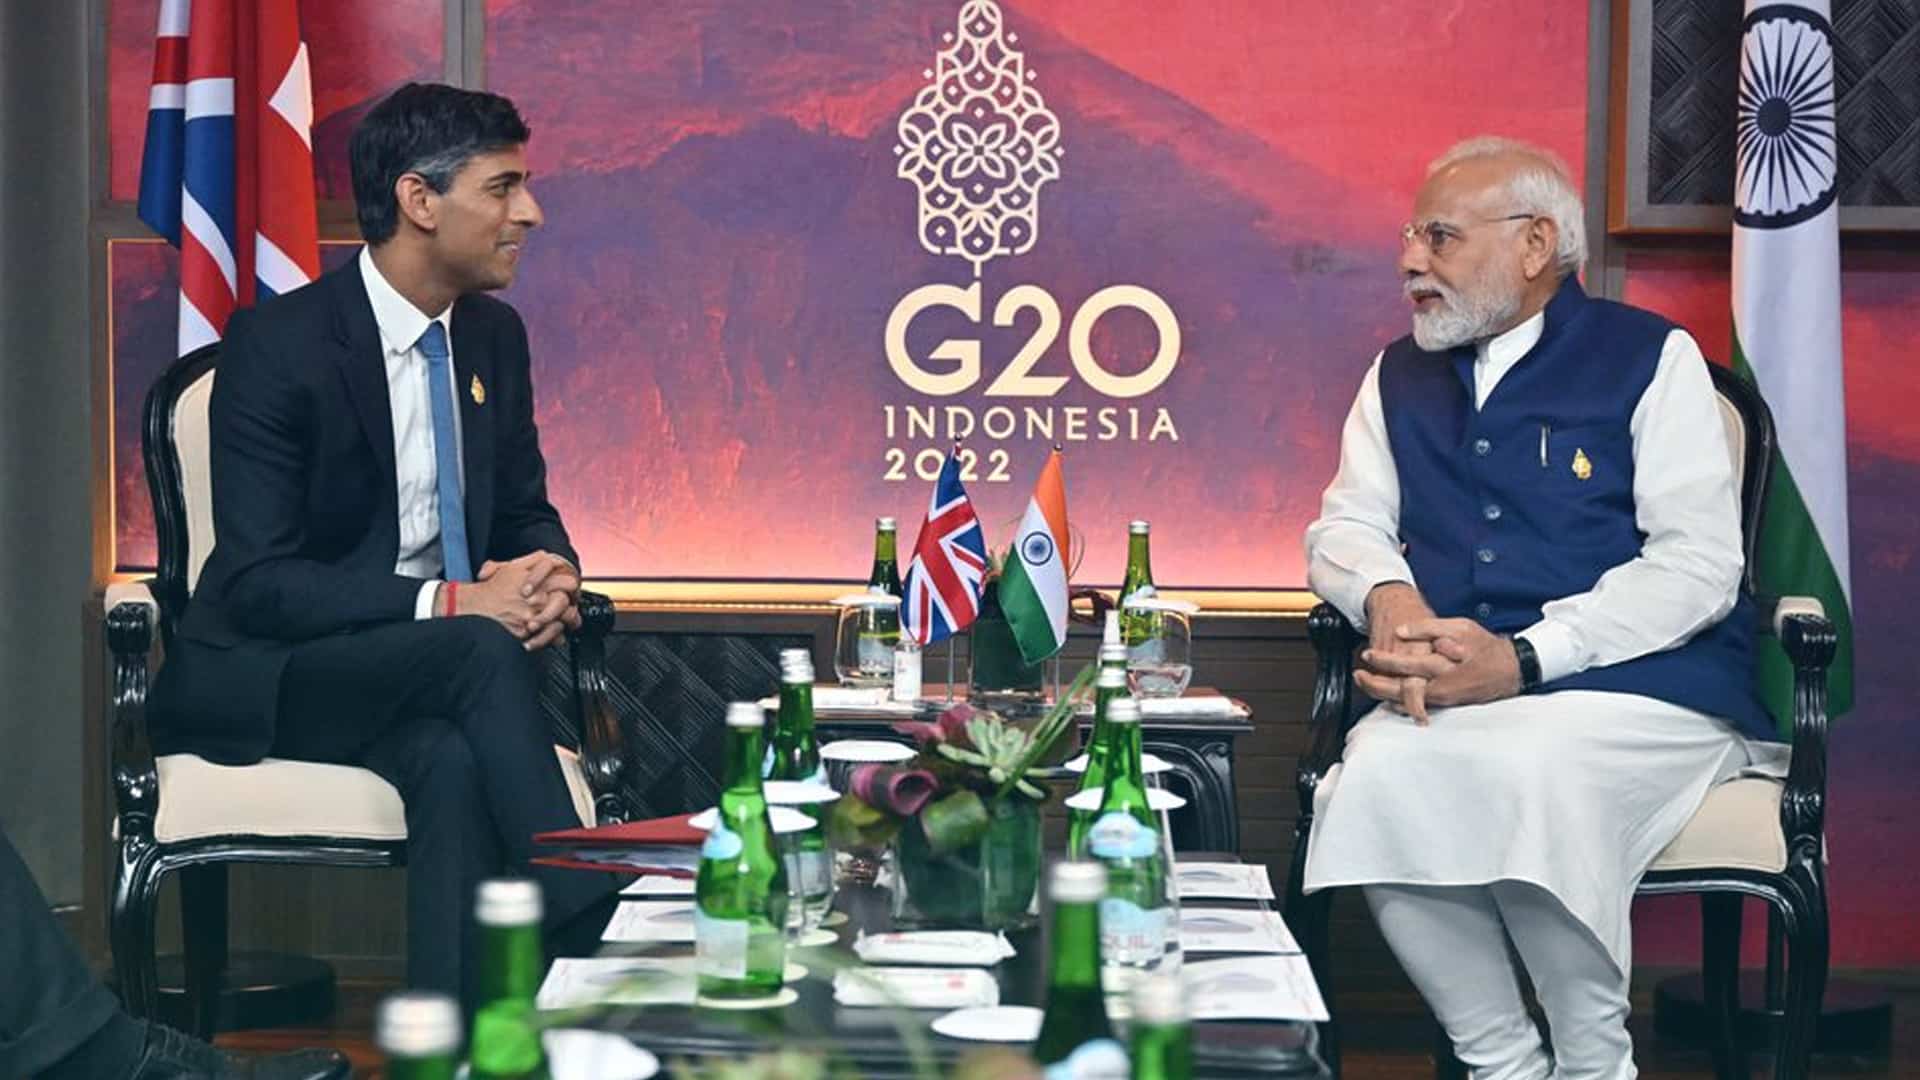 PM Modi and his British counterpart Sunak agreed on 'enduring importance' of UK-India relationship